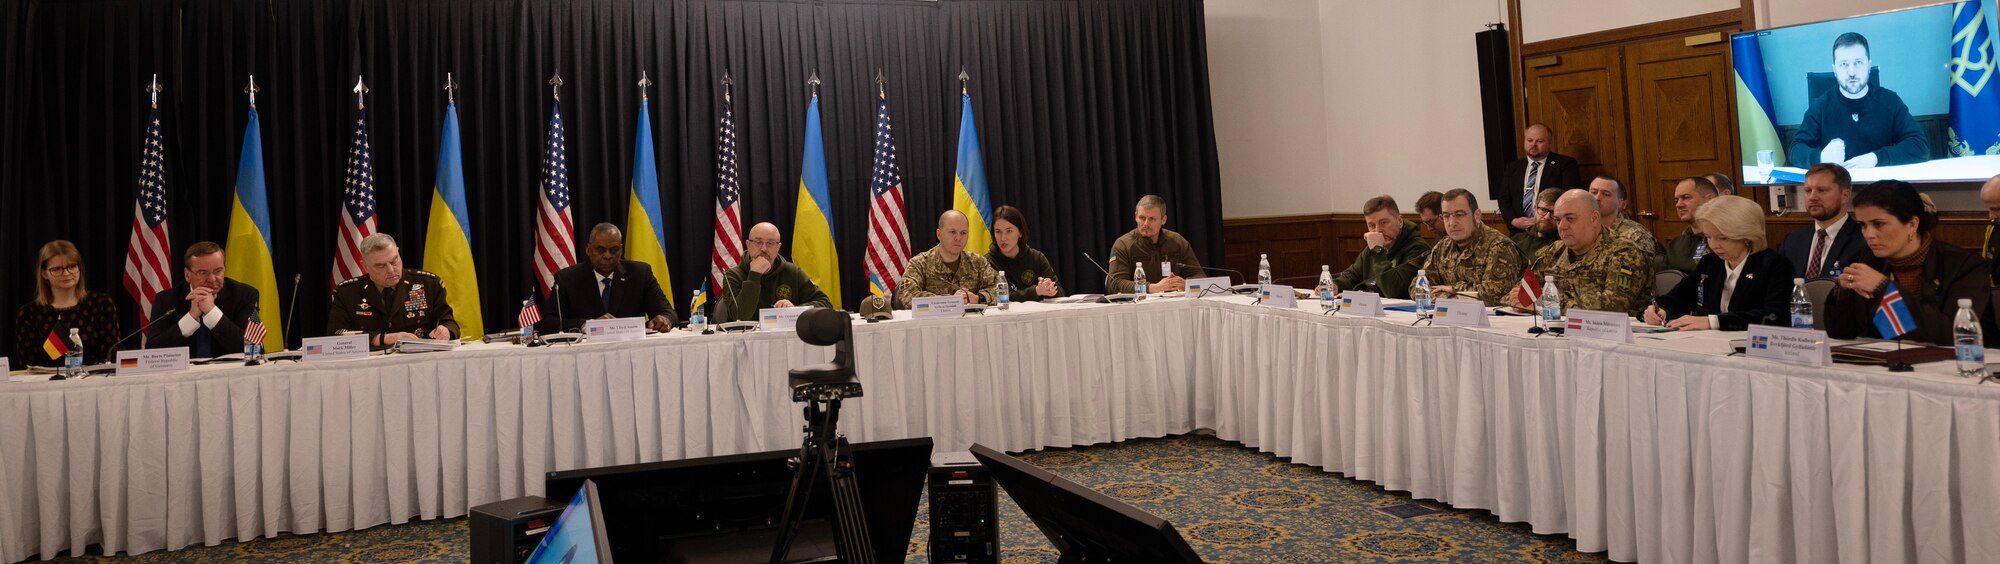 Chairman of the Joint Chiefs of Staff Gen. Mark A. Milley and Secretary of Defense Lloyd J. Austin III host the Ukraine Defense Contact Group at Ramstein Air Base, Germany